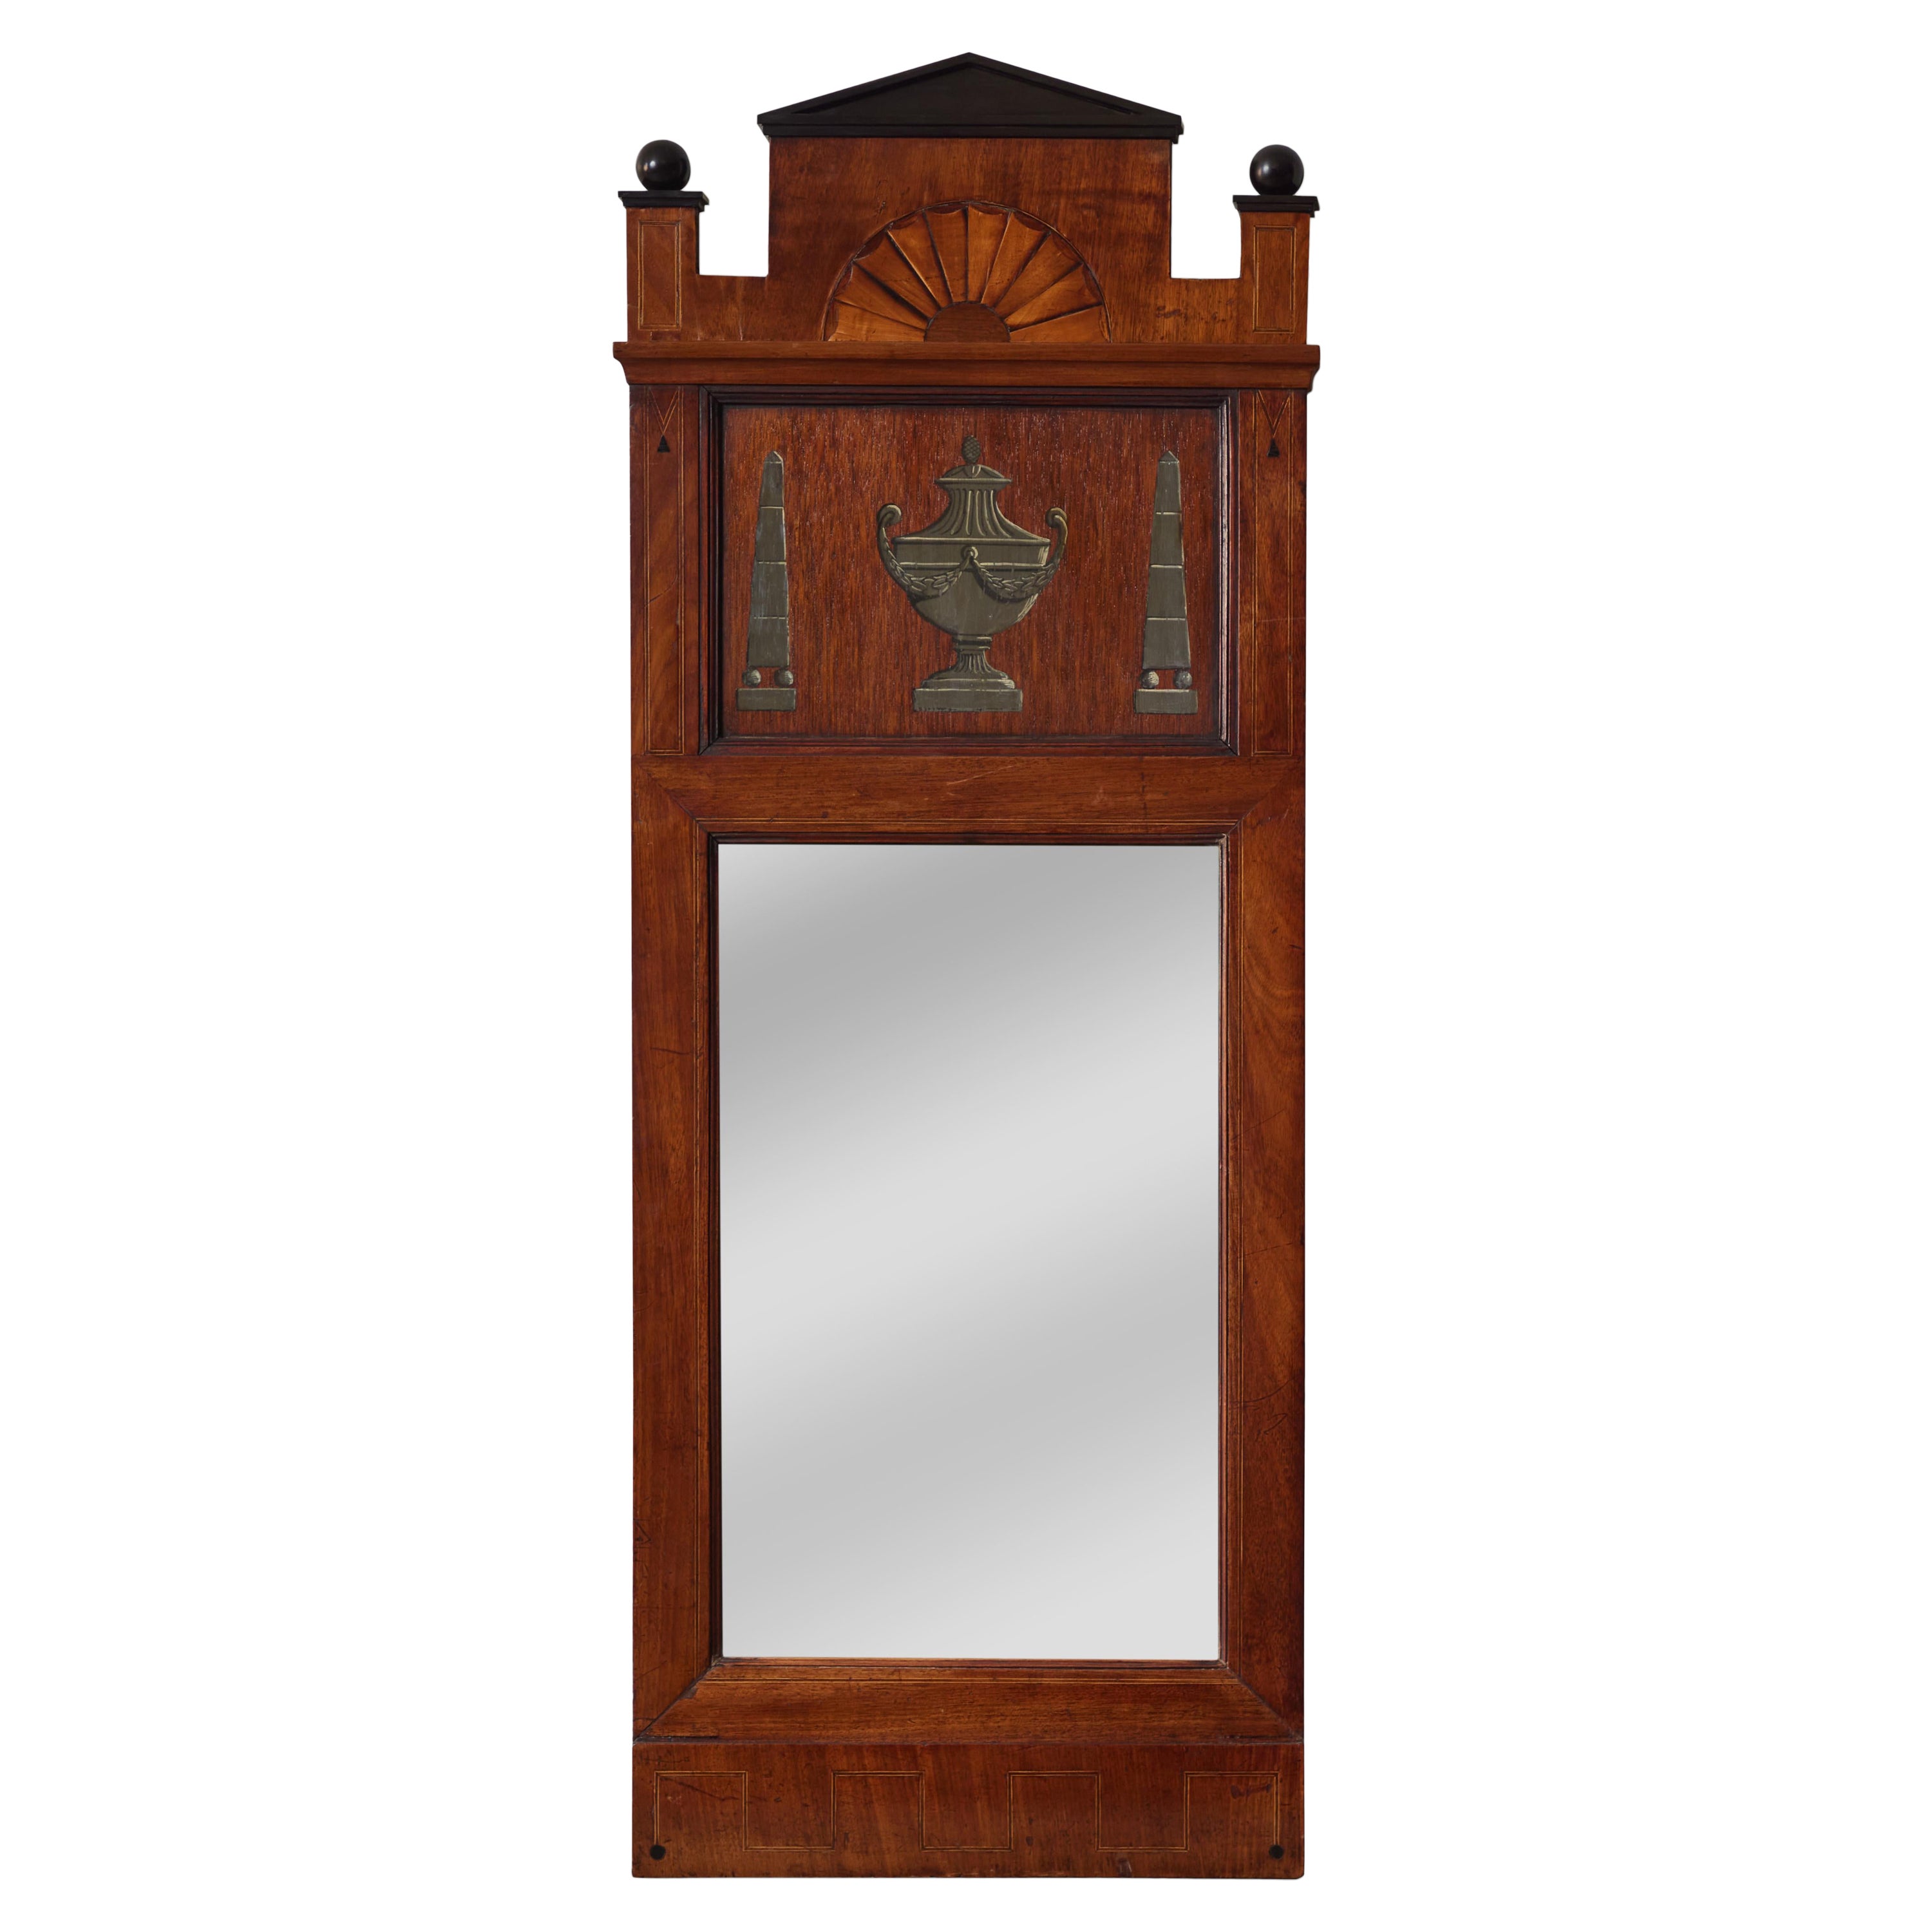 1820s Italian Inlaid Accent Mirror For Sale